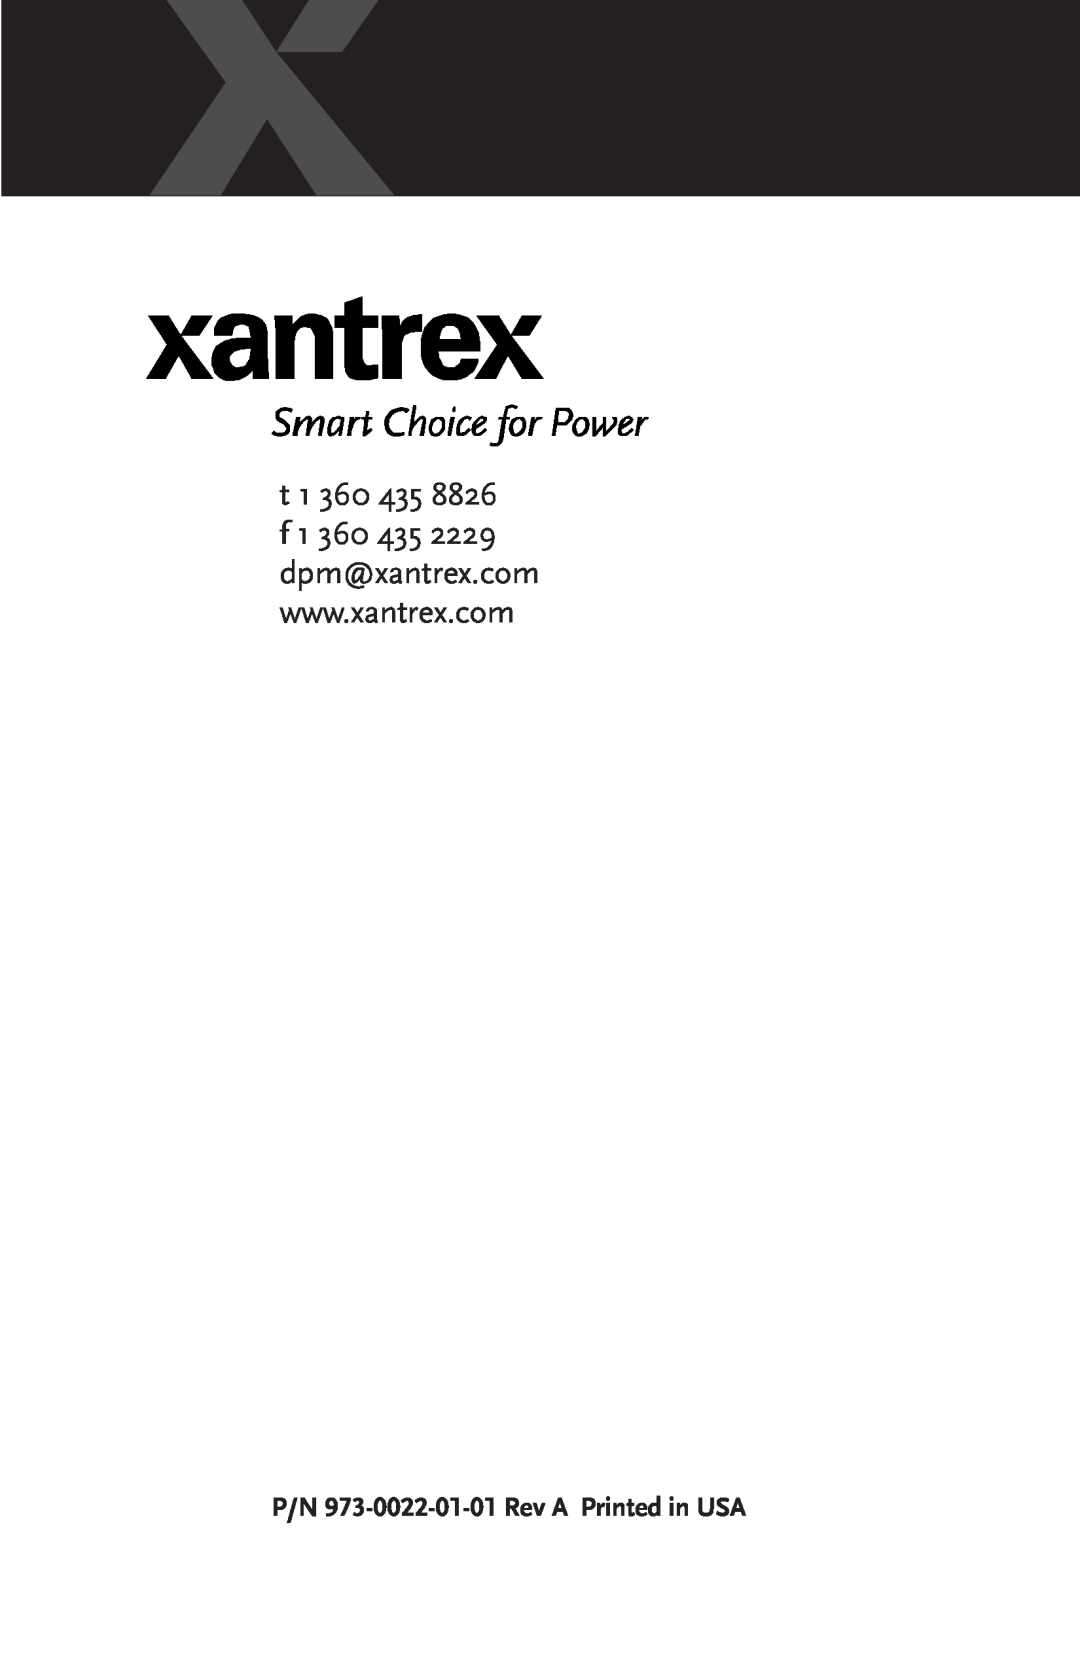 Xantrex Technology SW Communications Adapter owner manual P/N 973-0022-01-01 Rev A Printed in USA, 1 360 435 